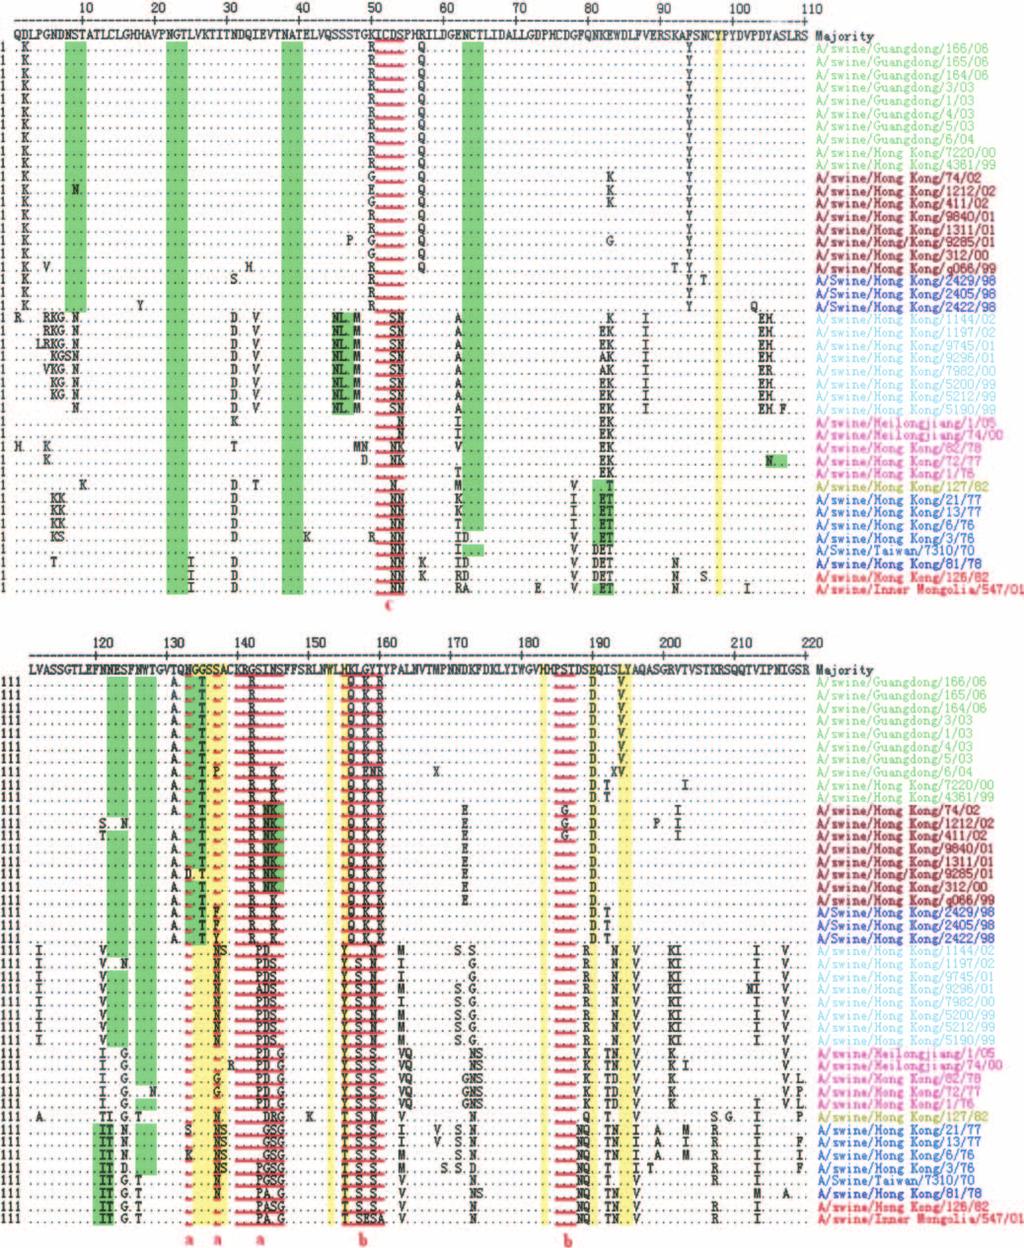 1072 YU ET AL. J. CLIN. MICROBIOL. FIG. 4. Alignment of HA1 amino acid sequences of the swine H3N2 influenza viruses from 1970 to 2006.